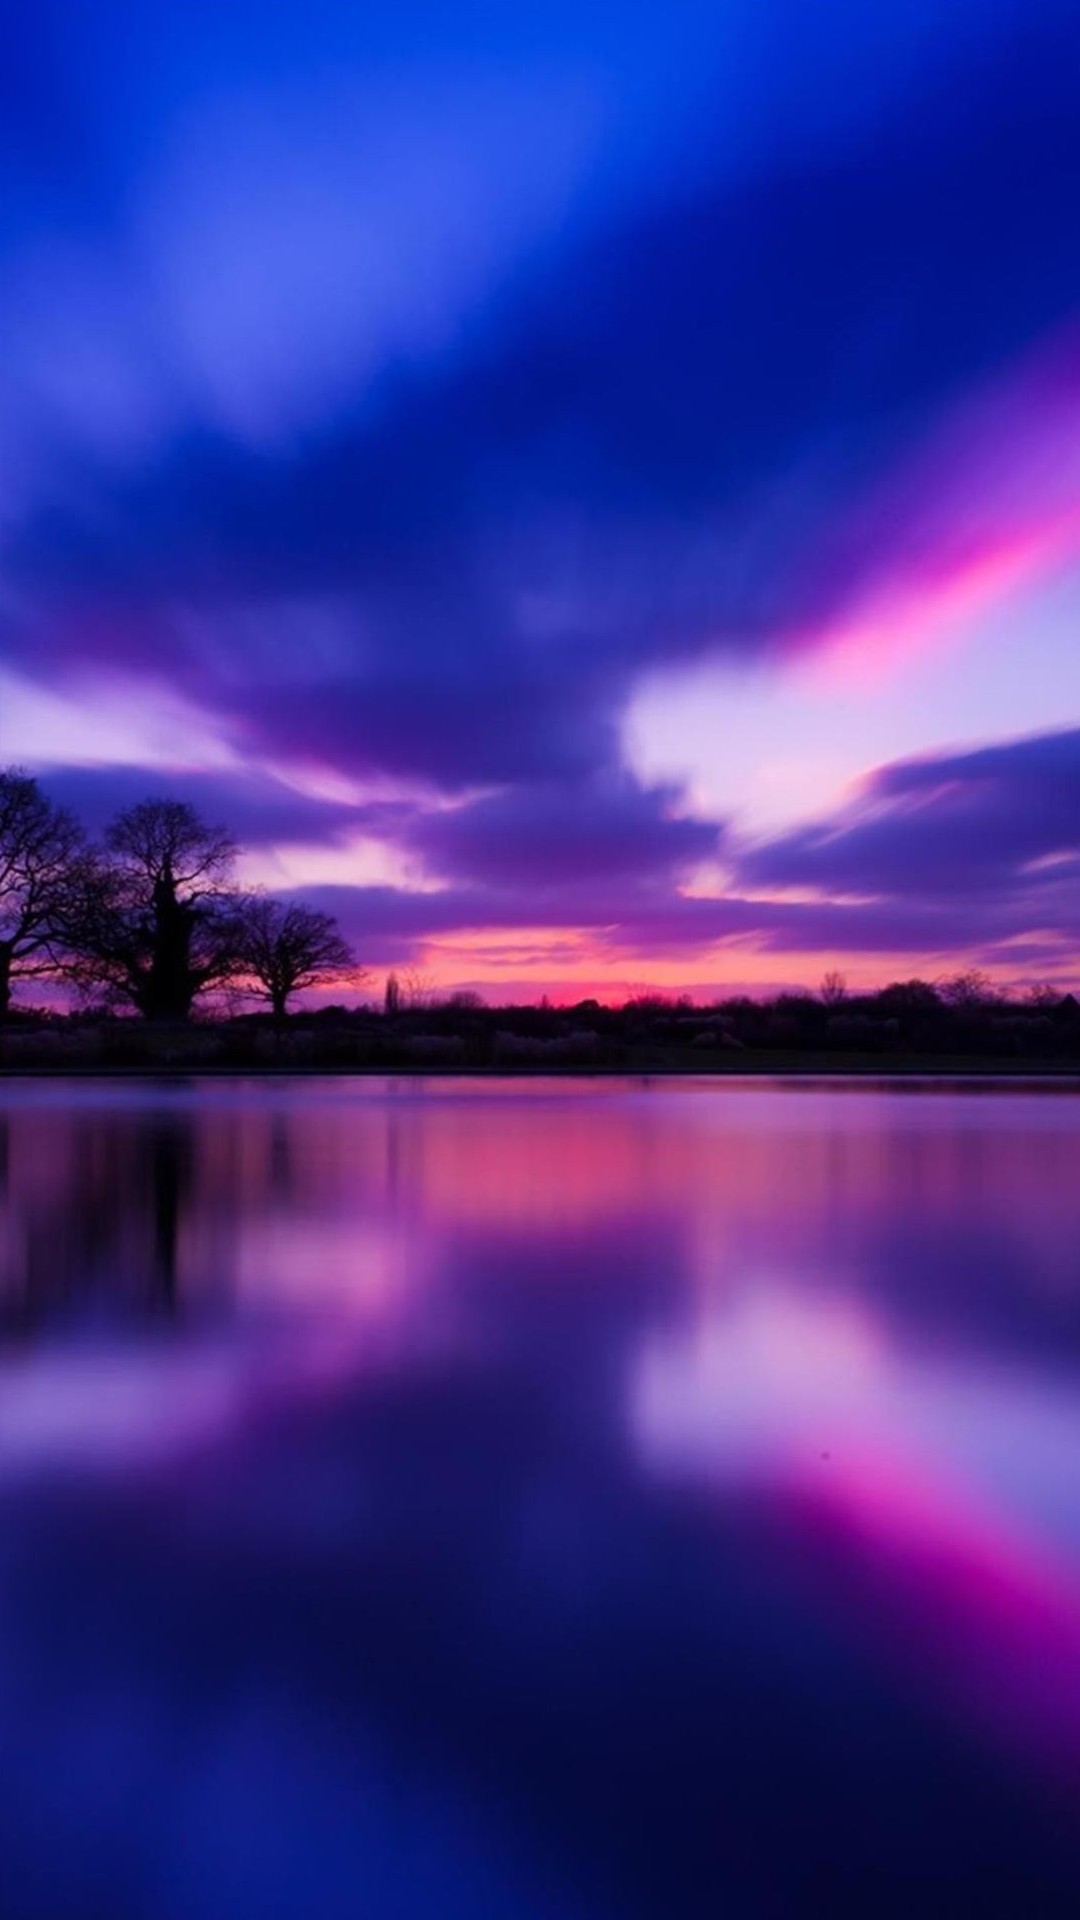 beautiful wallpapers for iphone,sky,nature,reflection,natural landscape,afterglow